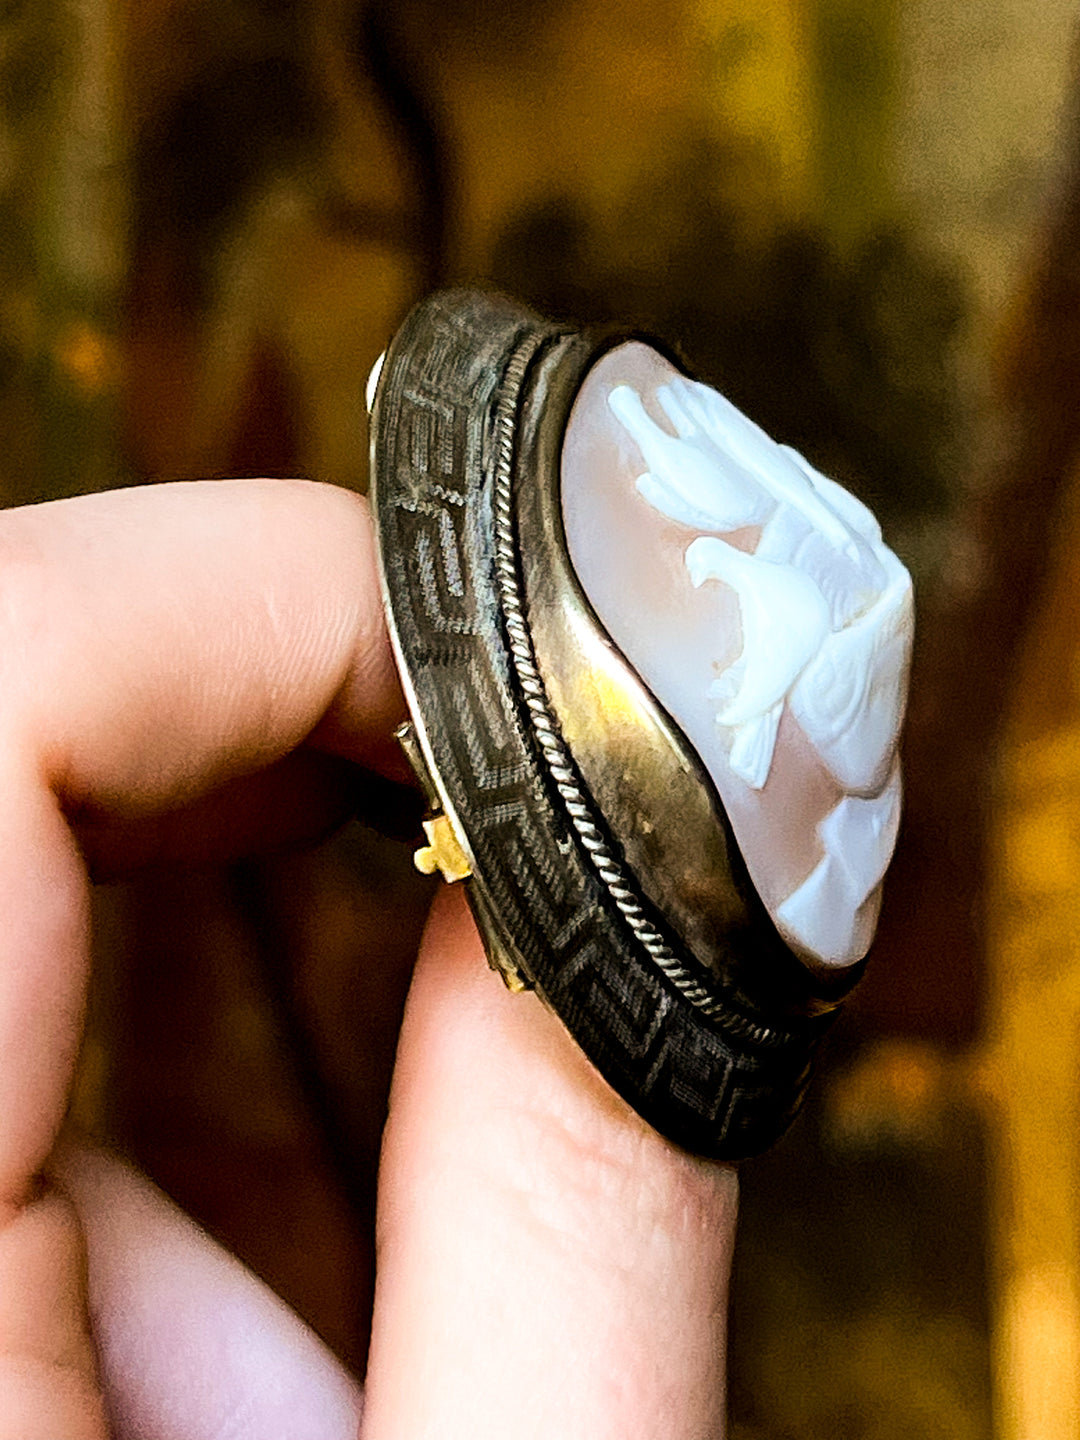 Large Scale Victorian Cameo Brooch Featuring Pliny's Doves